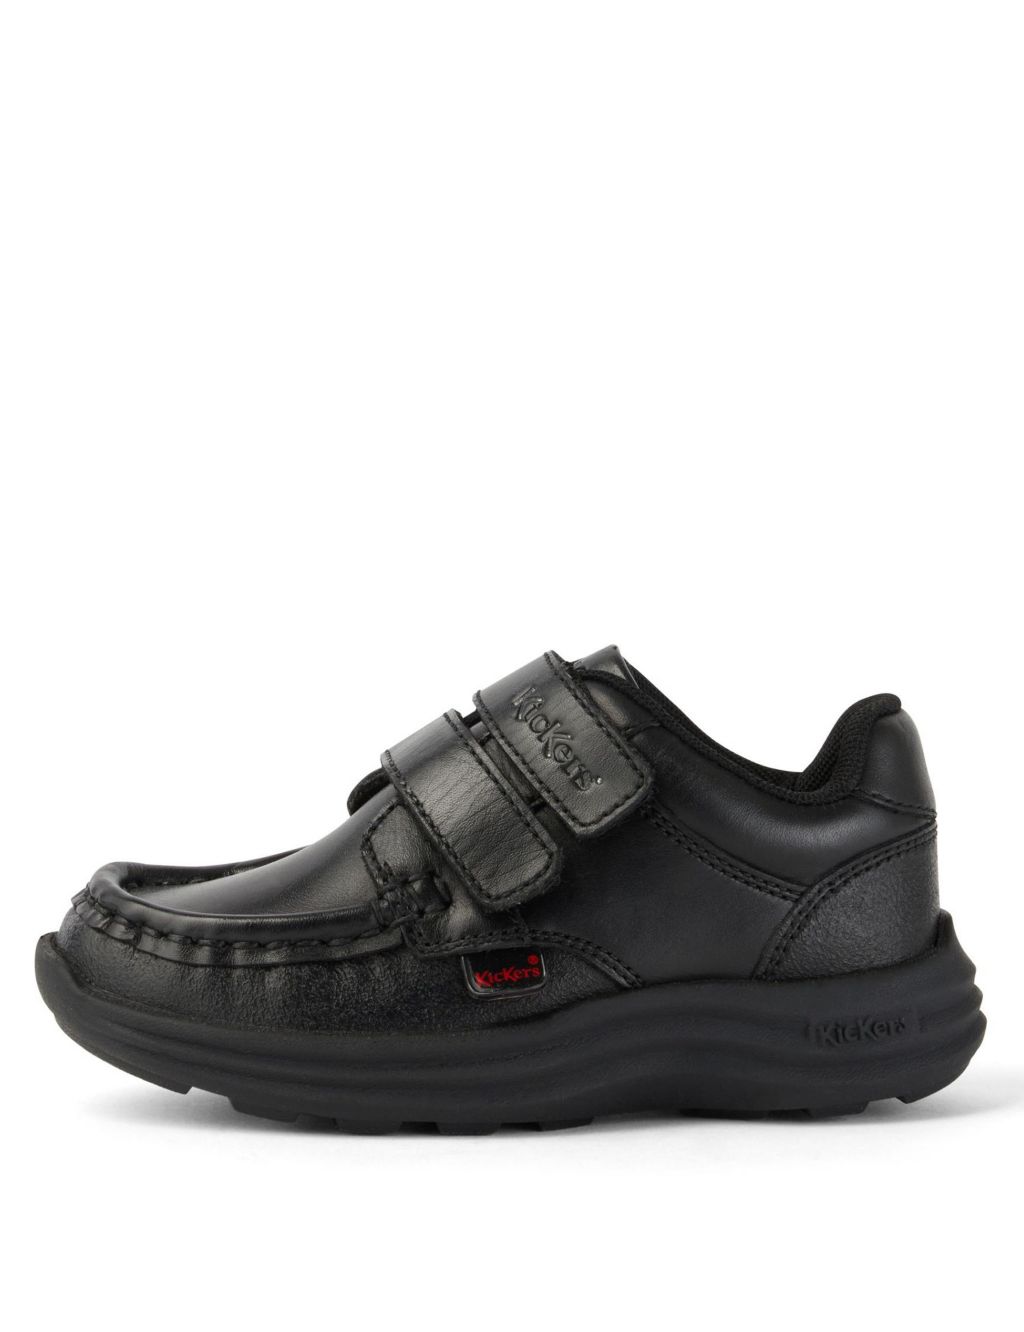 Kids' Leather Riptape School Shoes (7 Small - 12 Small)